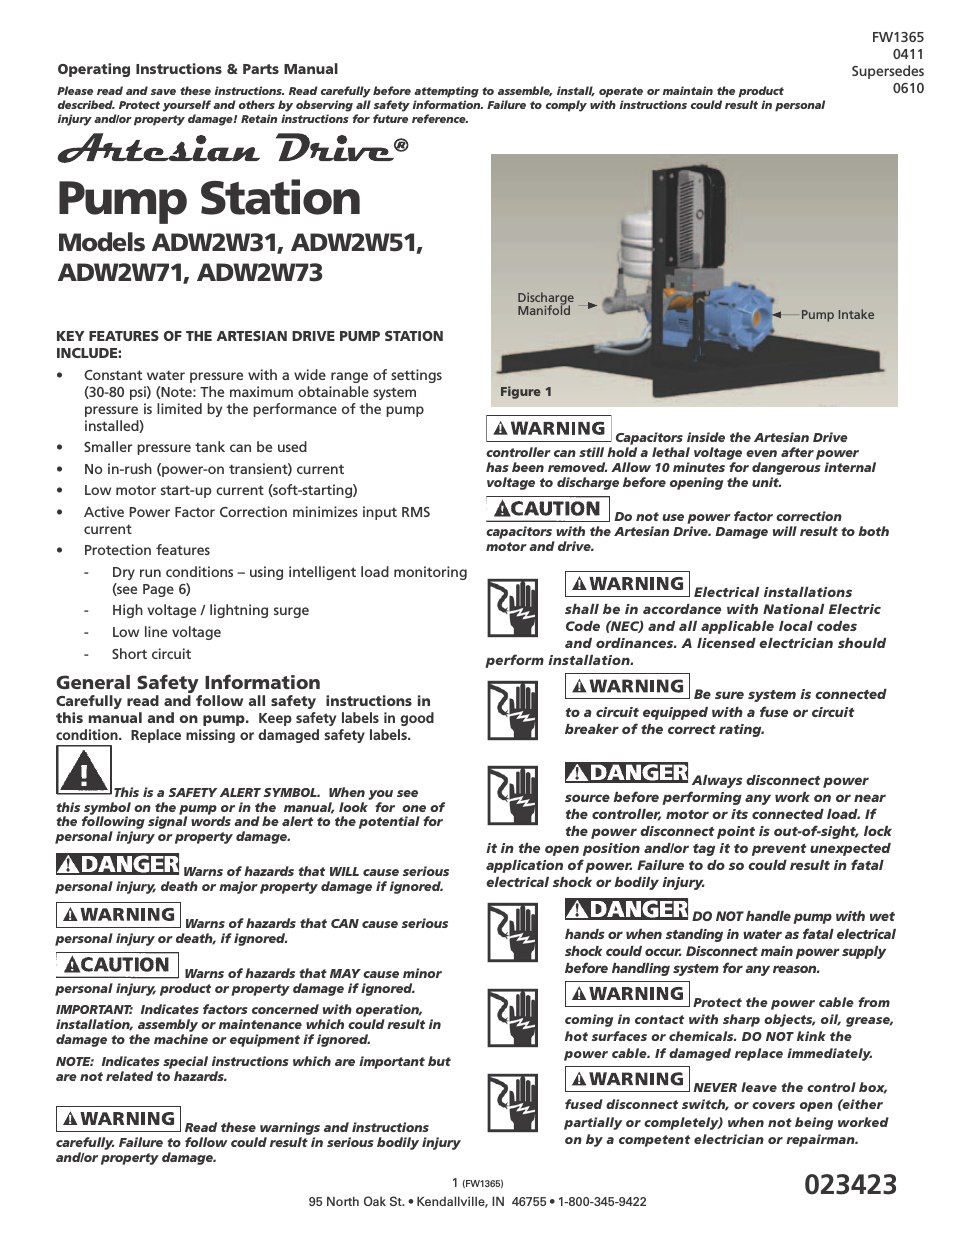 Constant Pressure Pumping Stations - ADW2W51